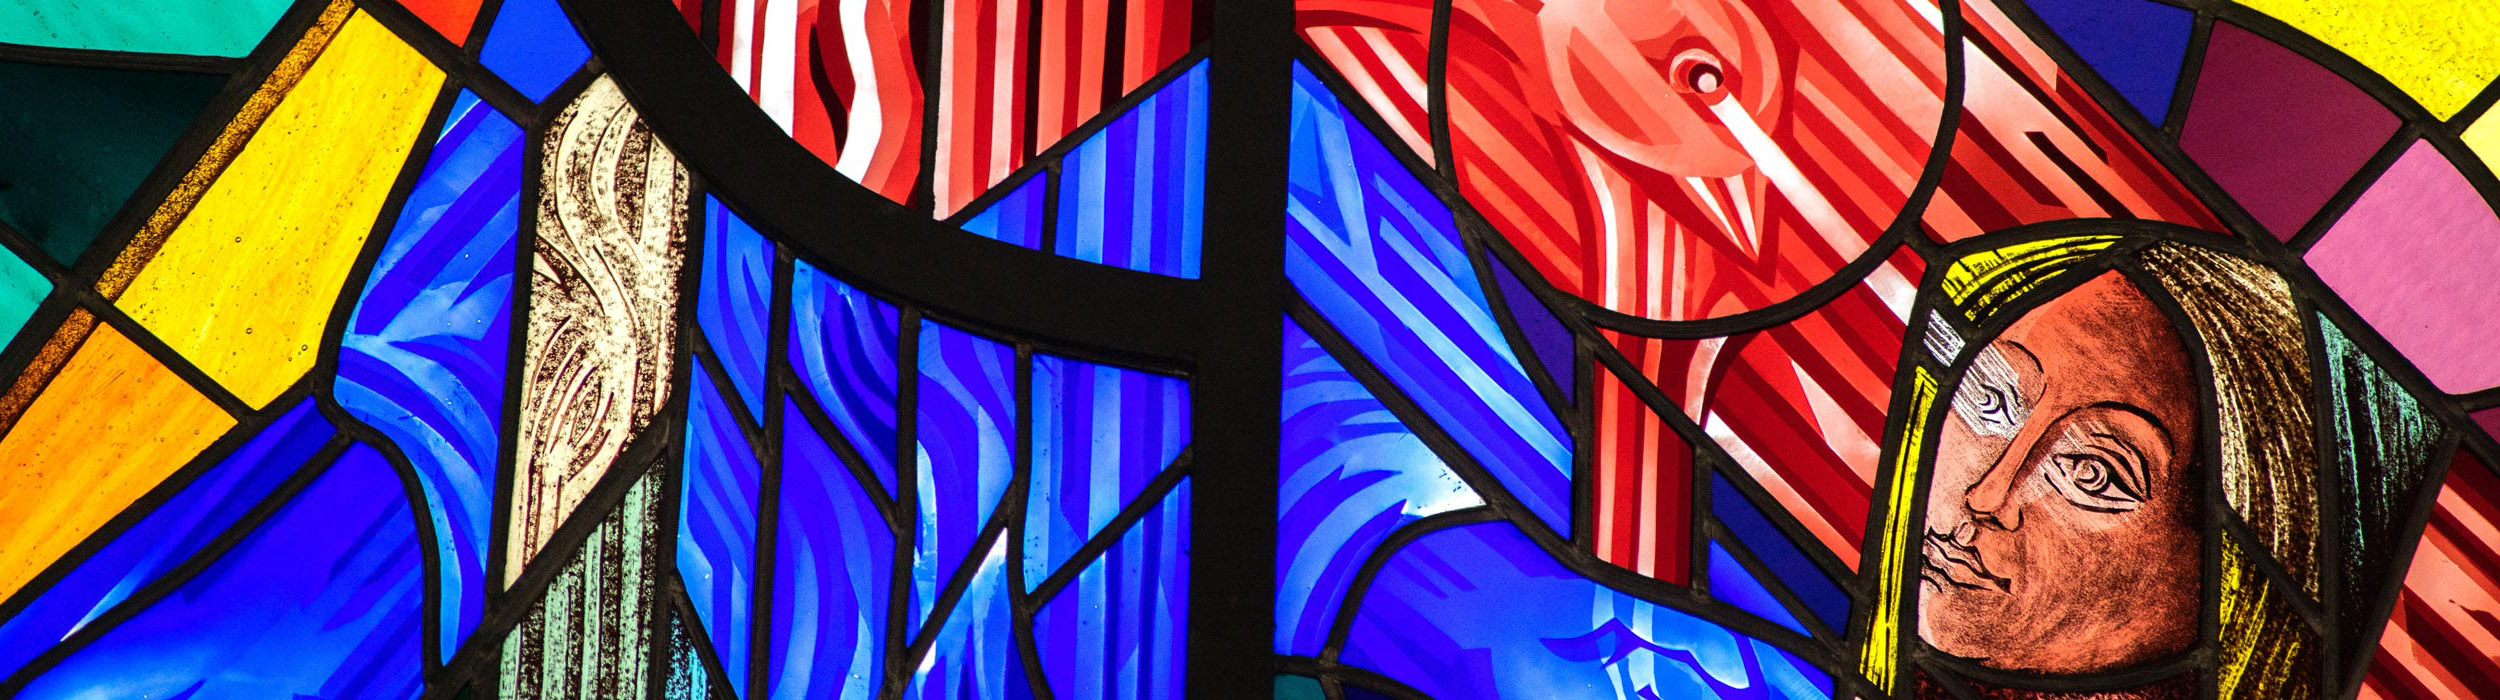 Stain glass image of a woman looking up